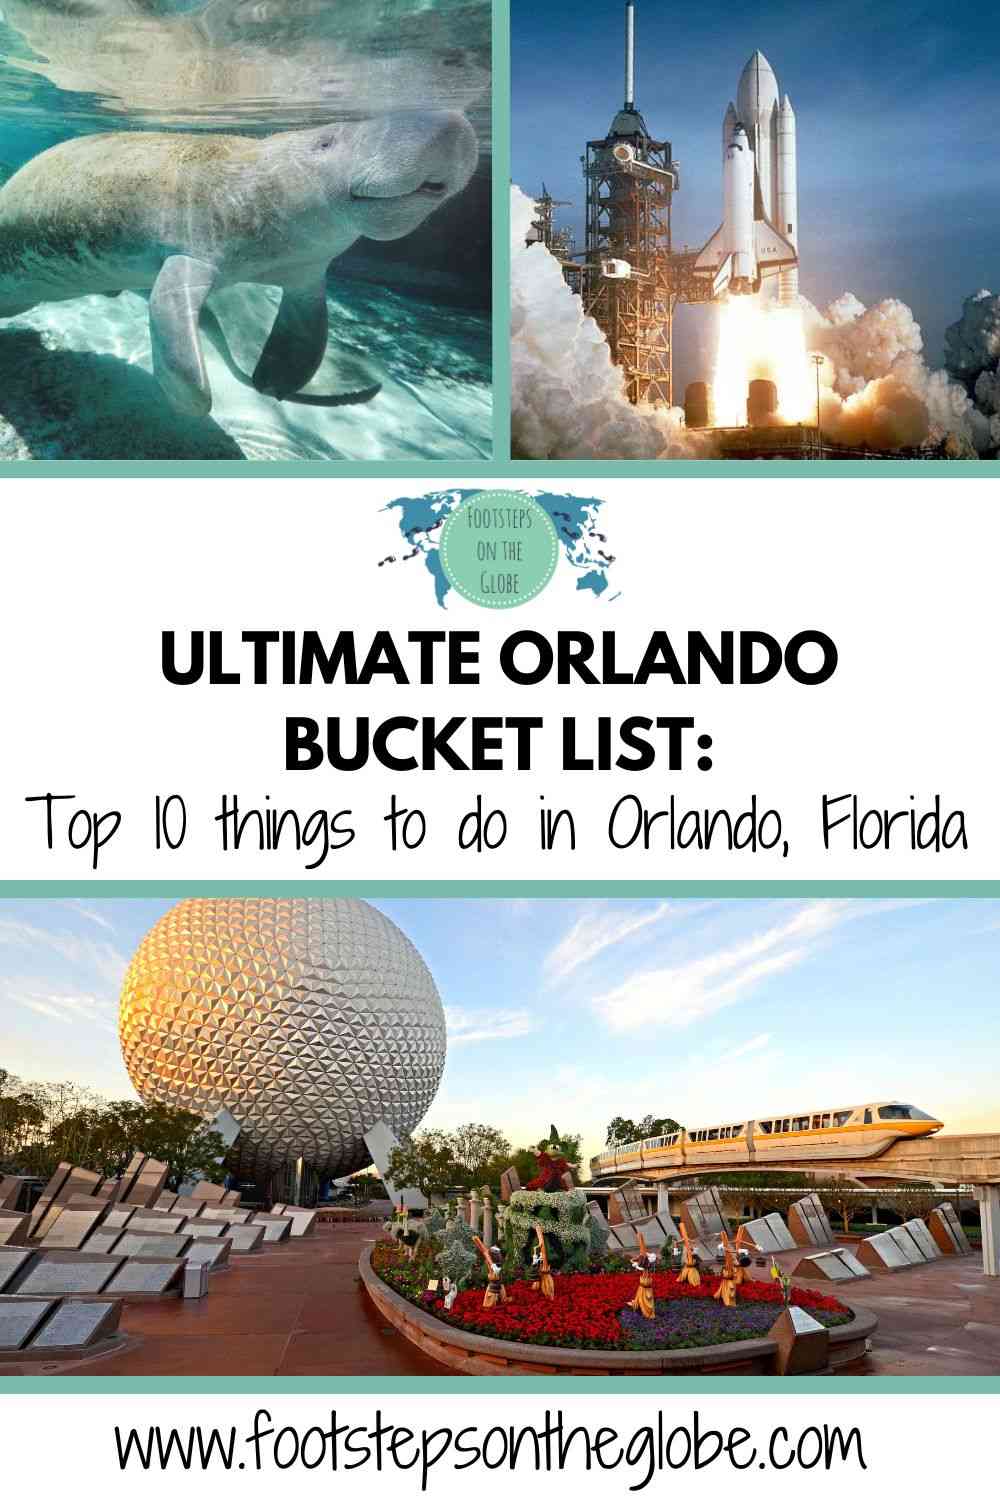 Pinterest image with images of a manatee, rocket launching pad and the entrance to Epcot in Orlando, with the text: "ULTIMATE ORLANDO BUCKET LIST: Top 10 things to do in Orlando, Florida" 